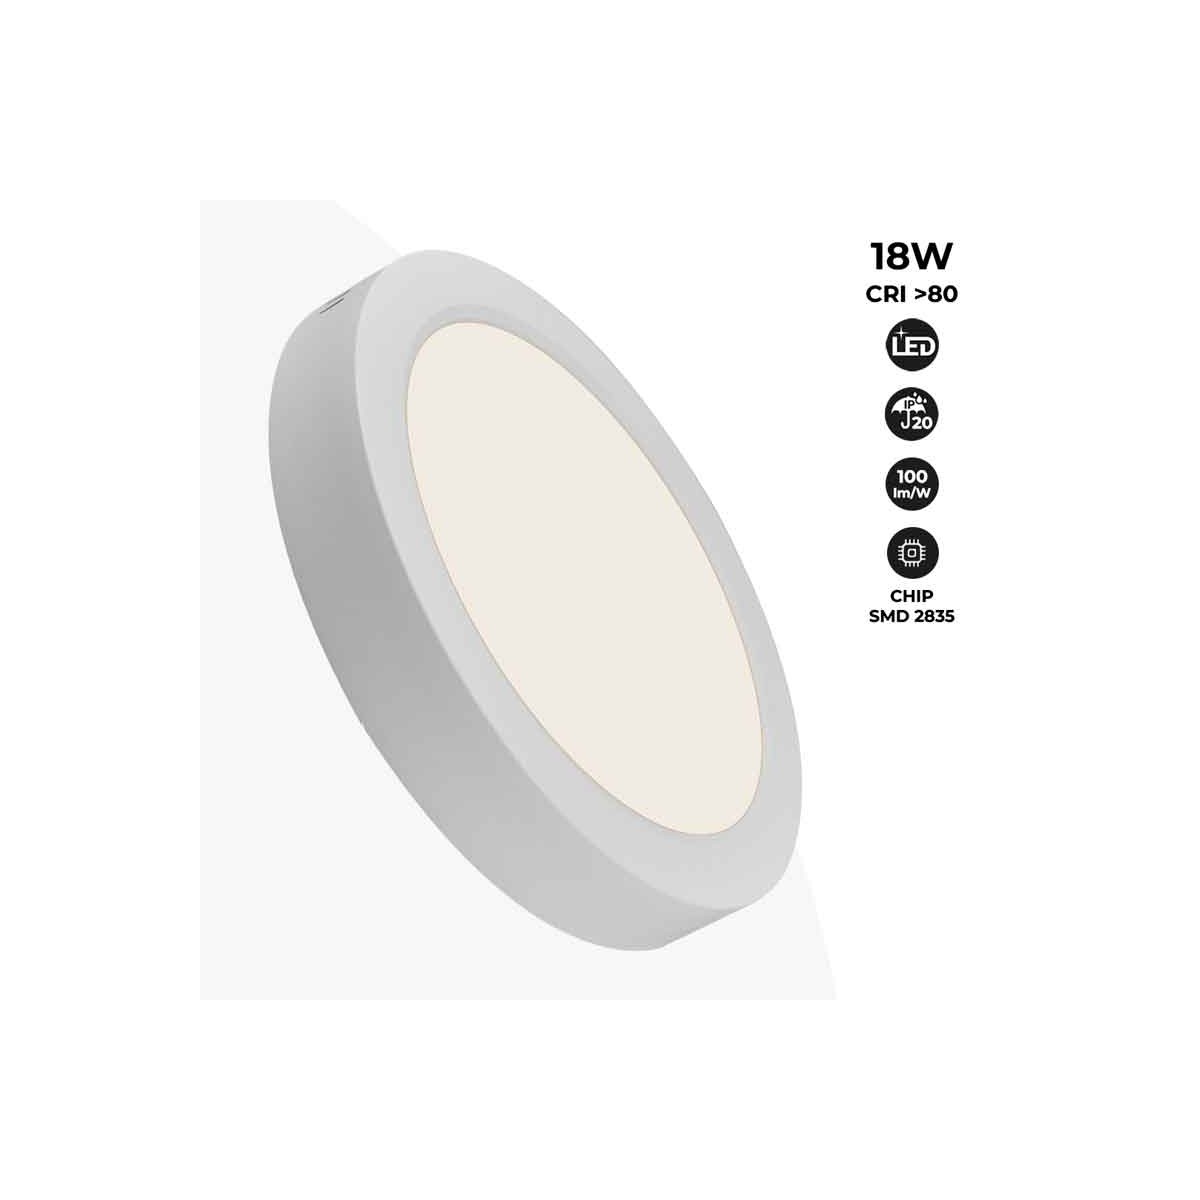 Surface mounted LED ceiling light DOB 18W High Efficiency